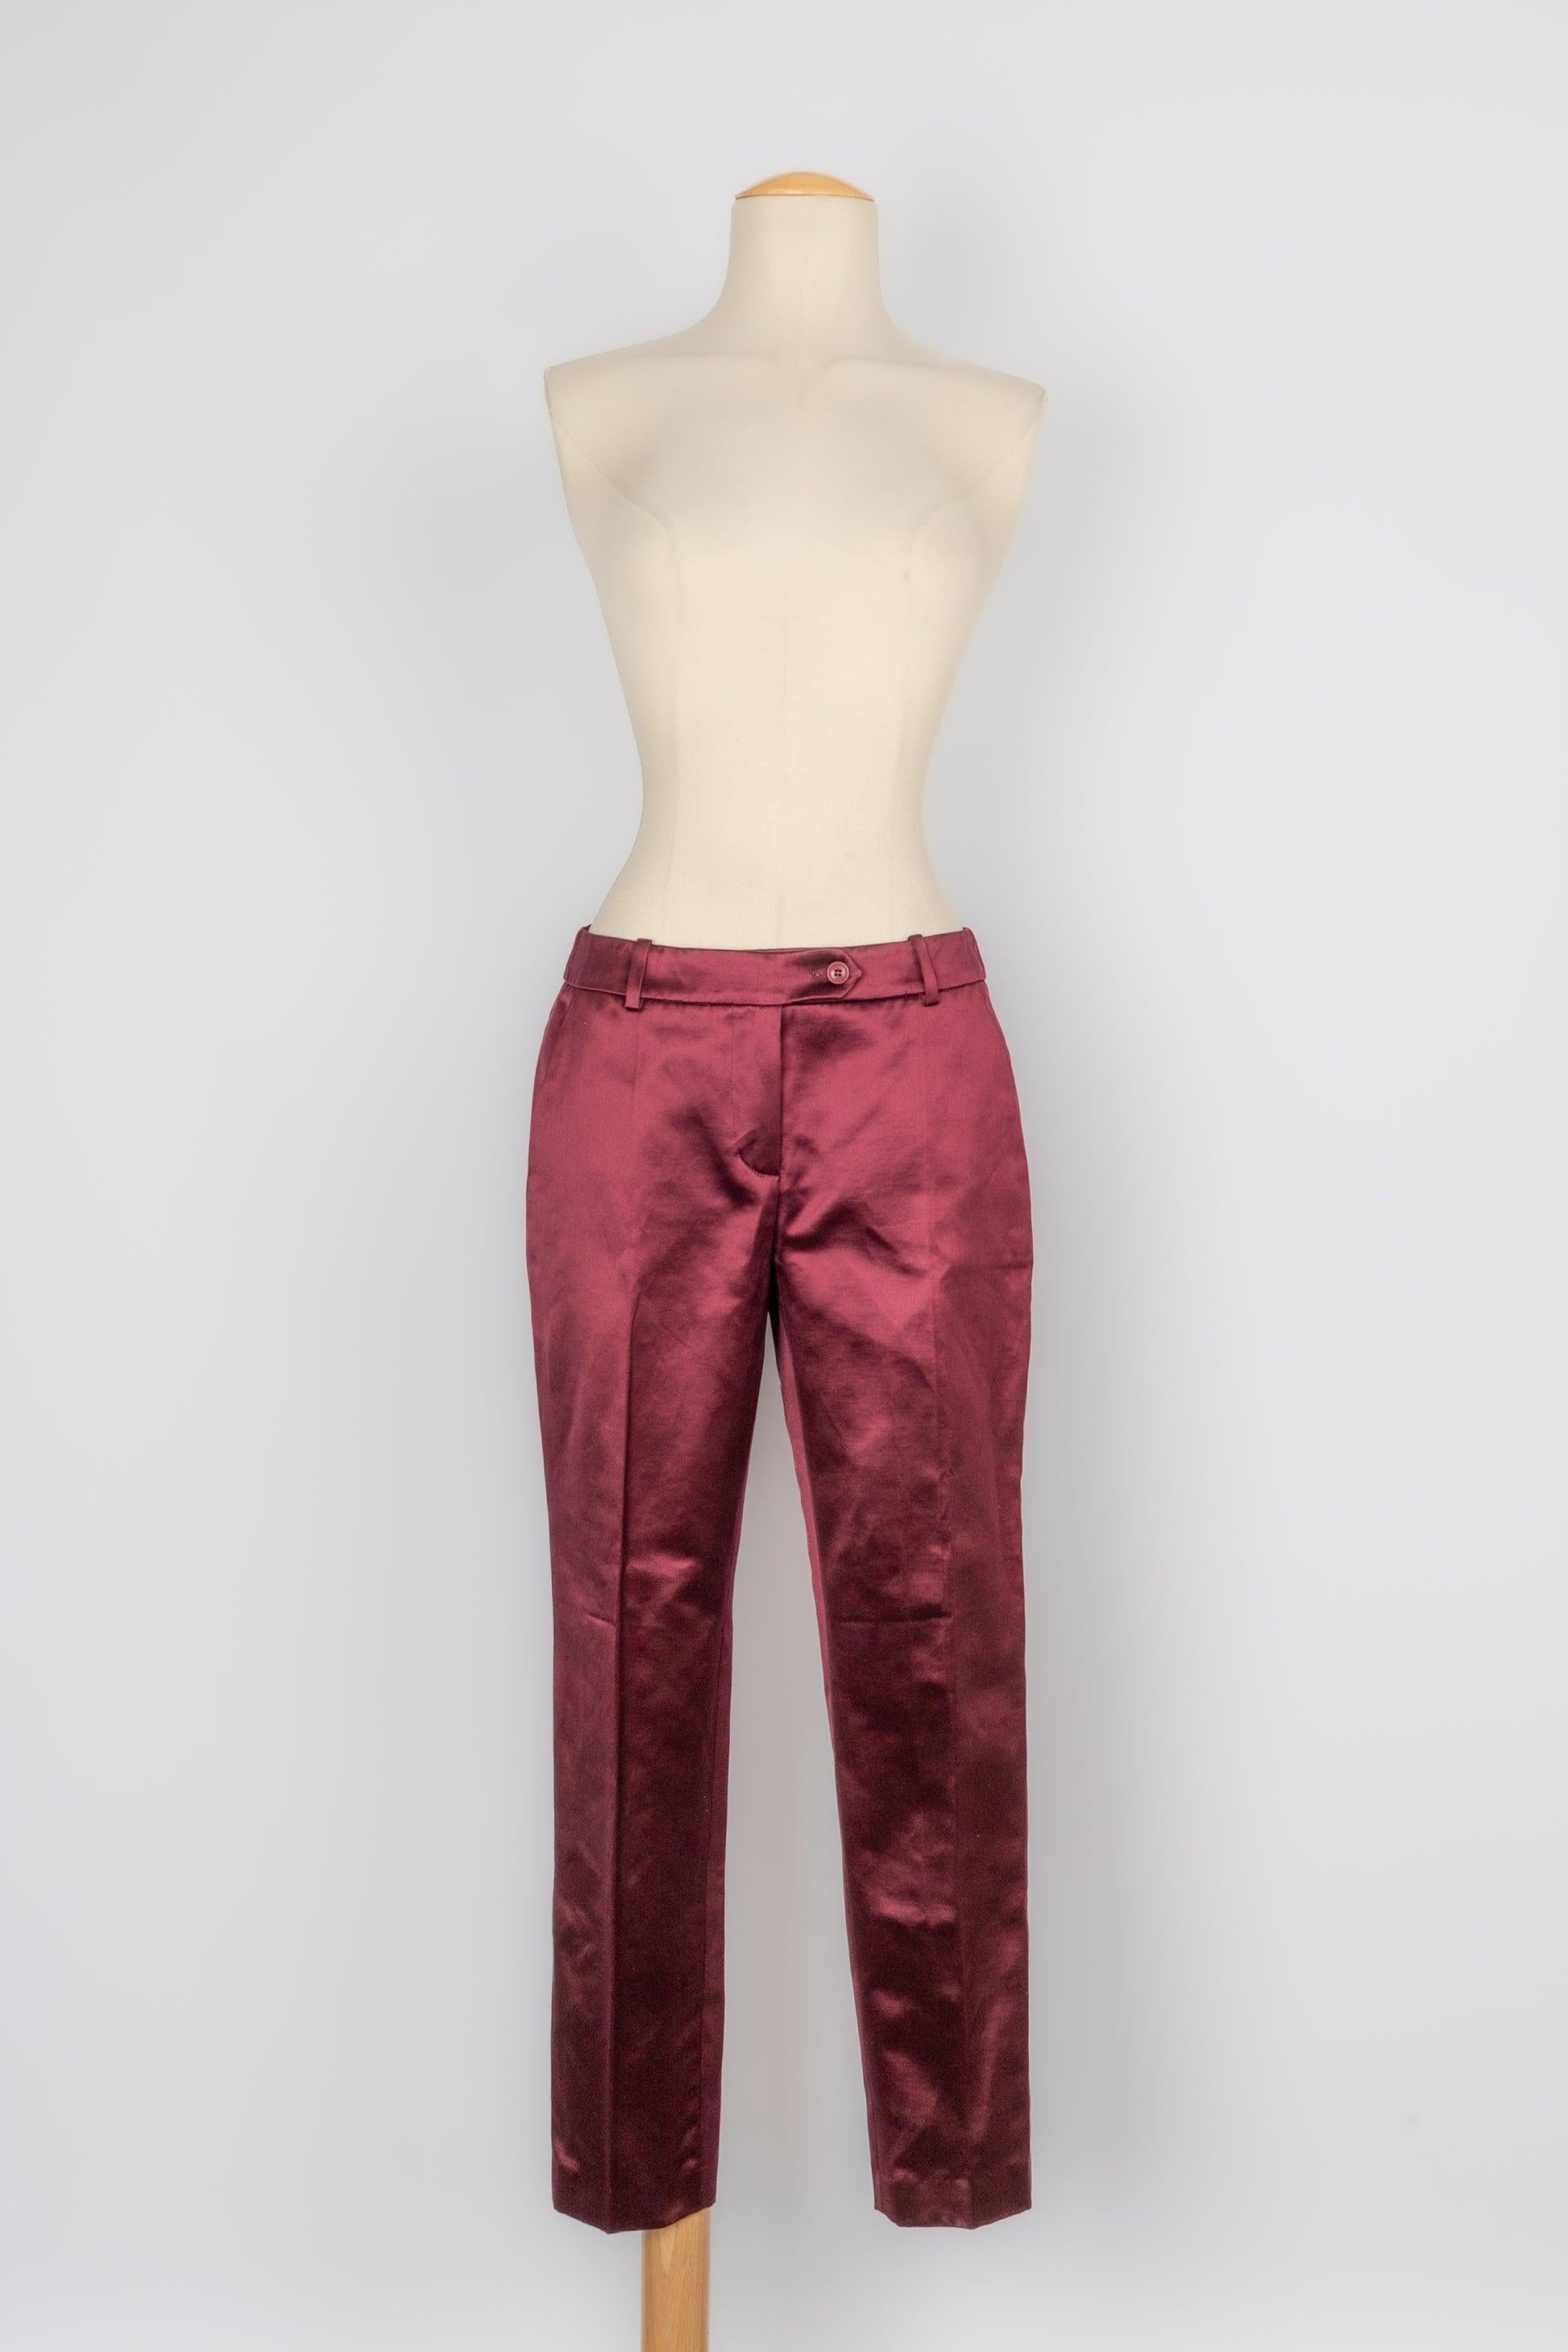 Christian Dior Set Jacket and Pair of Pants, 2008 For Sale 4